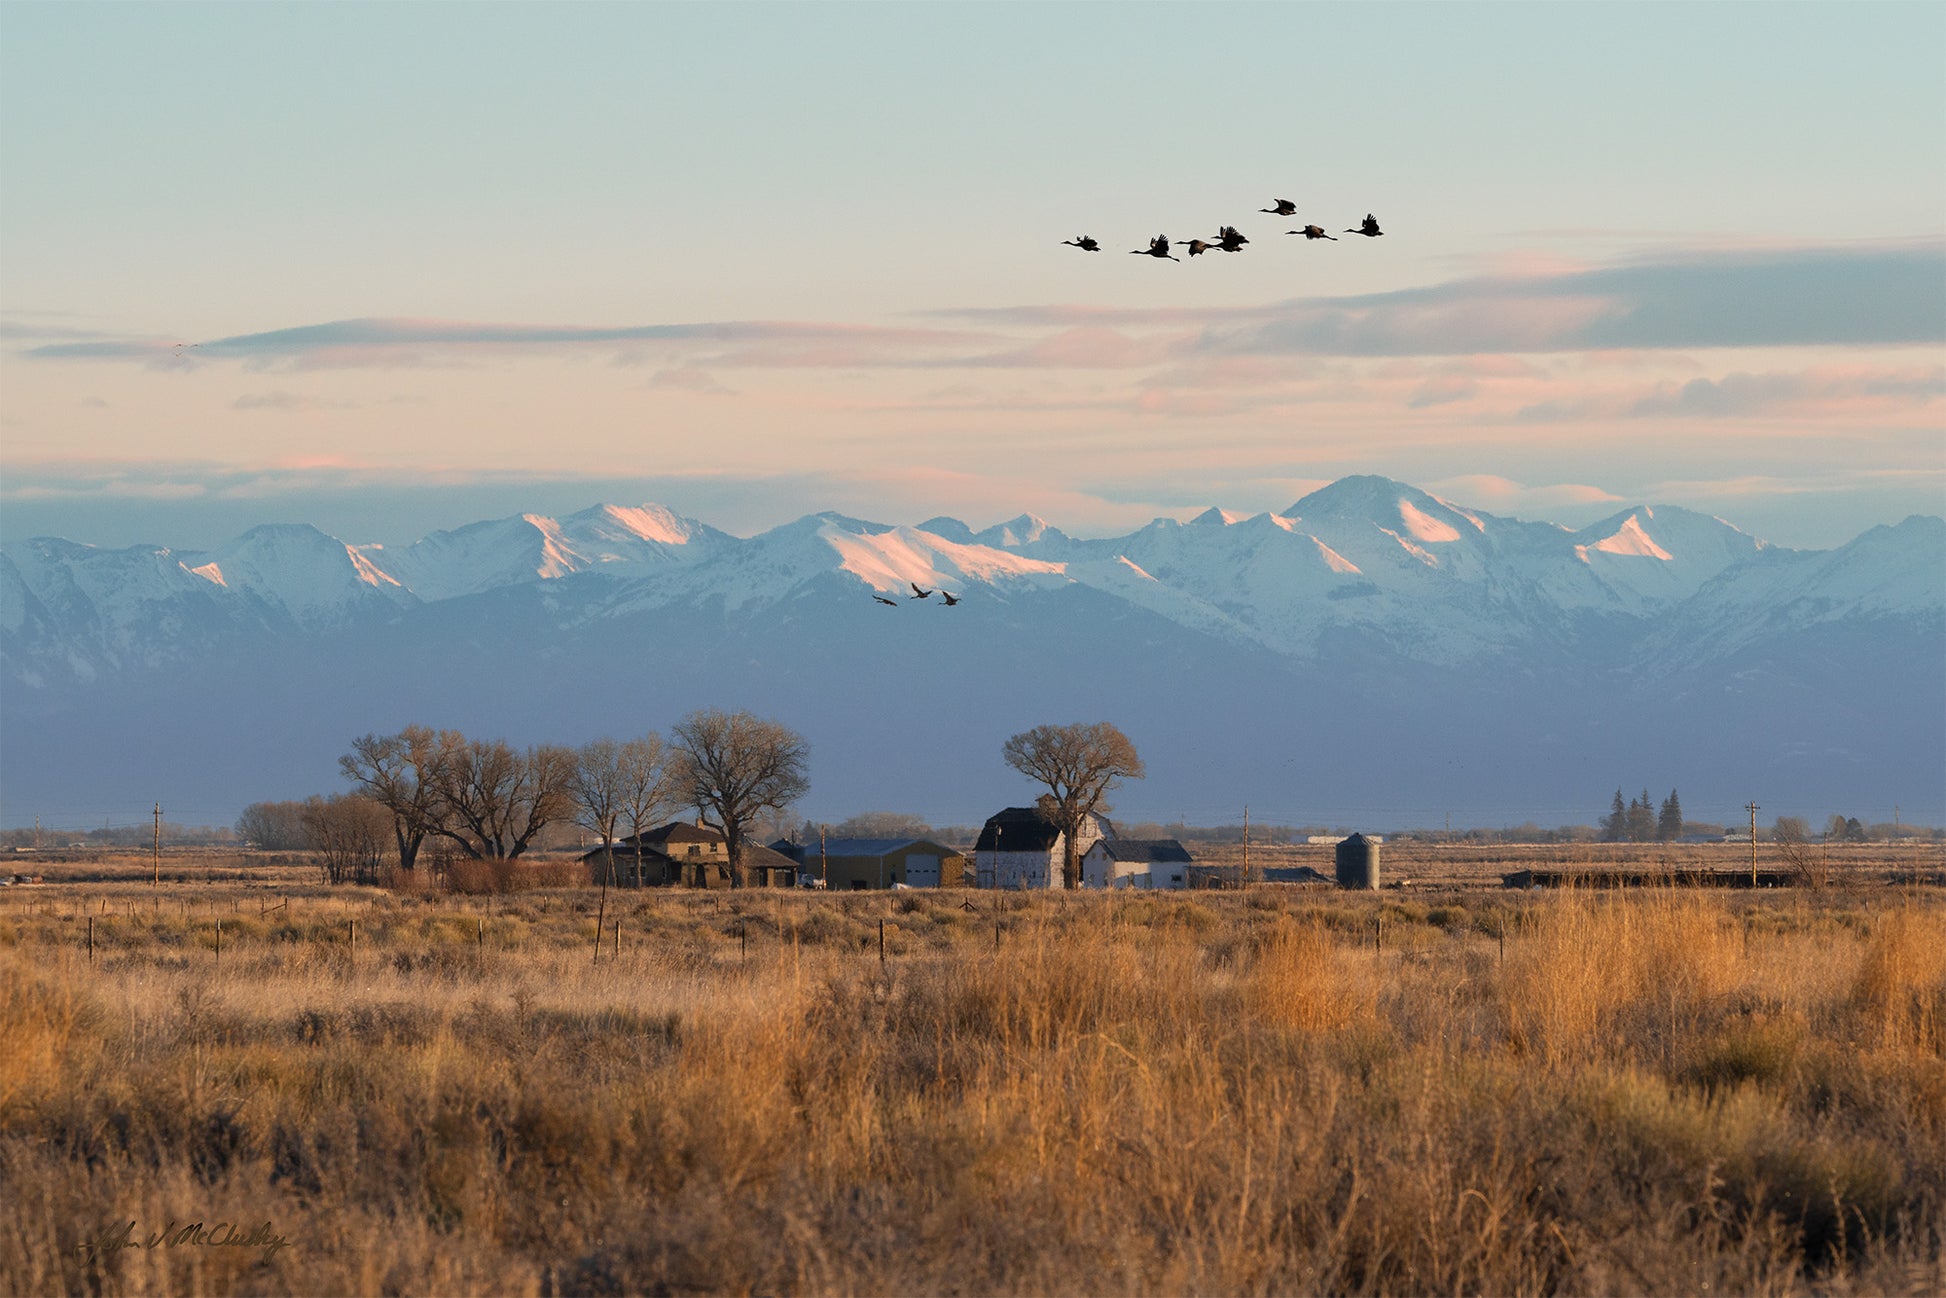 Cranes fly overhead as the light of breaking dawn lights snow capped mountains, prairie grasses, and a homestead in this landscape nature image.